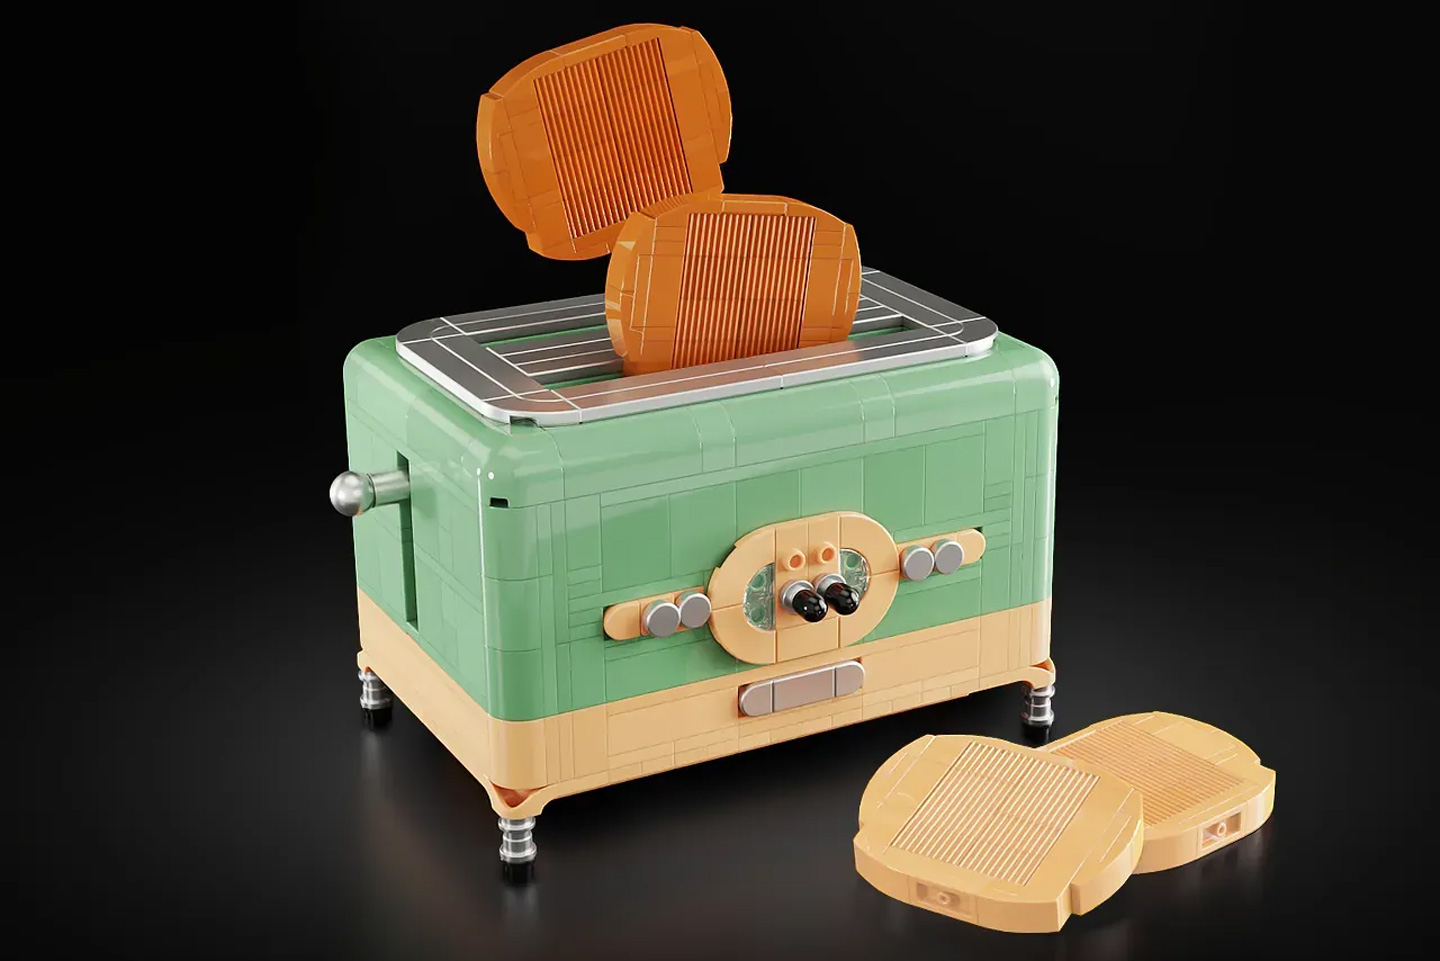 #LEGO Vintage Toaster will actually take white brick slices and turn them into brown LEGO toast!